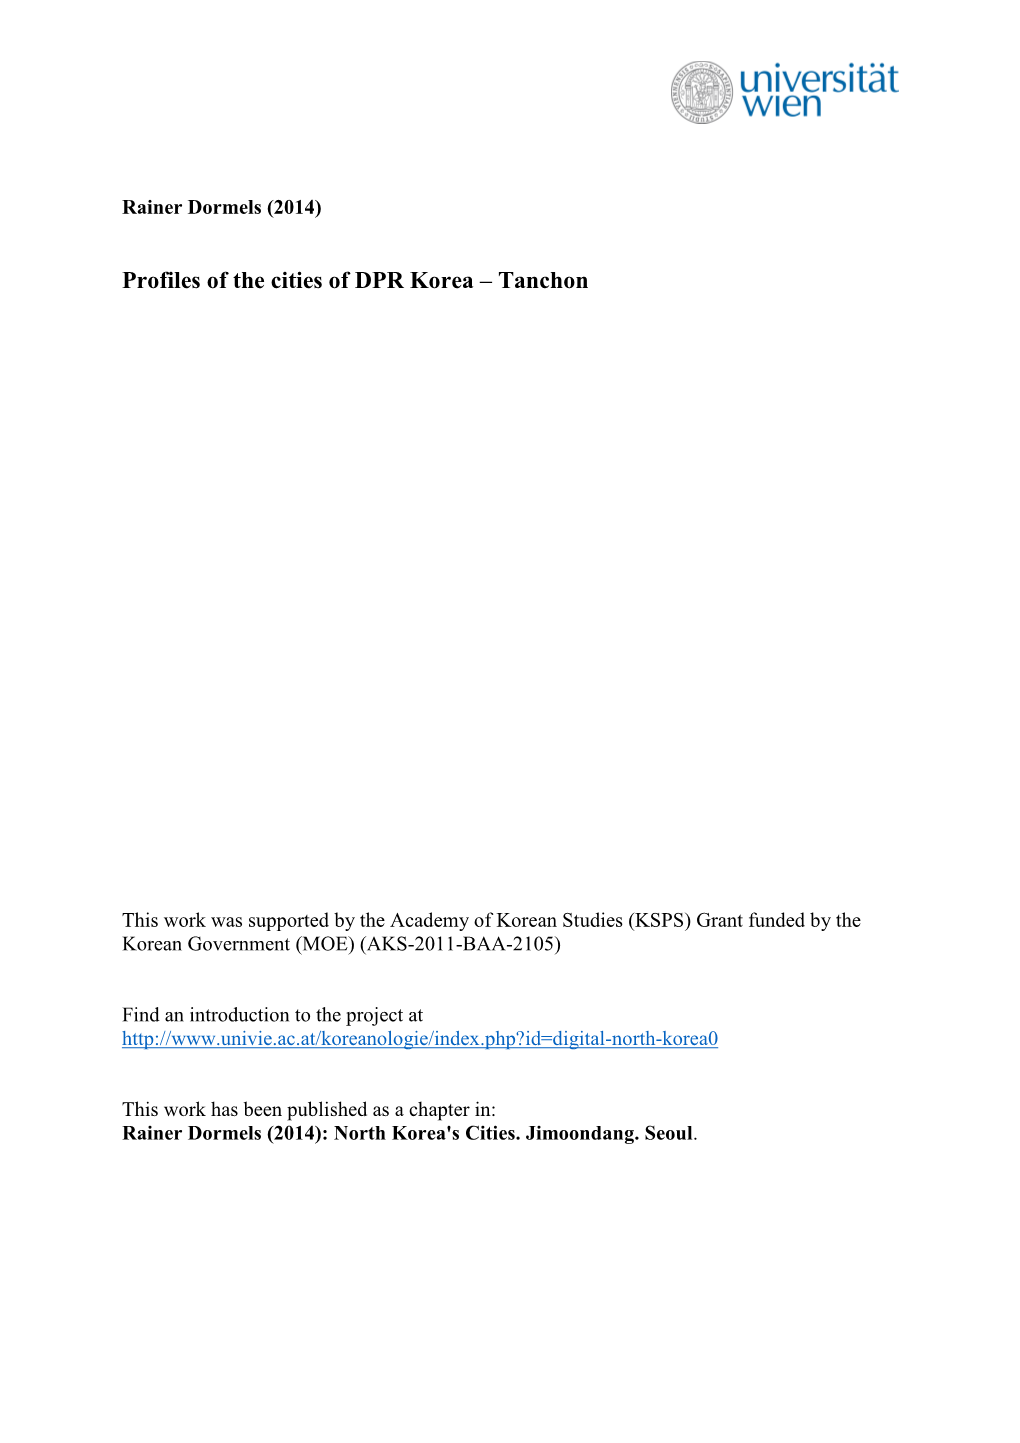 Profiles of the Cities of DPR Korea – Tanchon